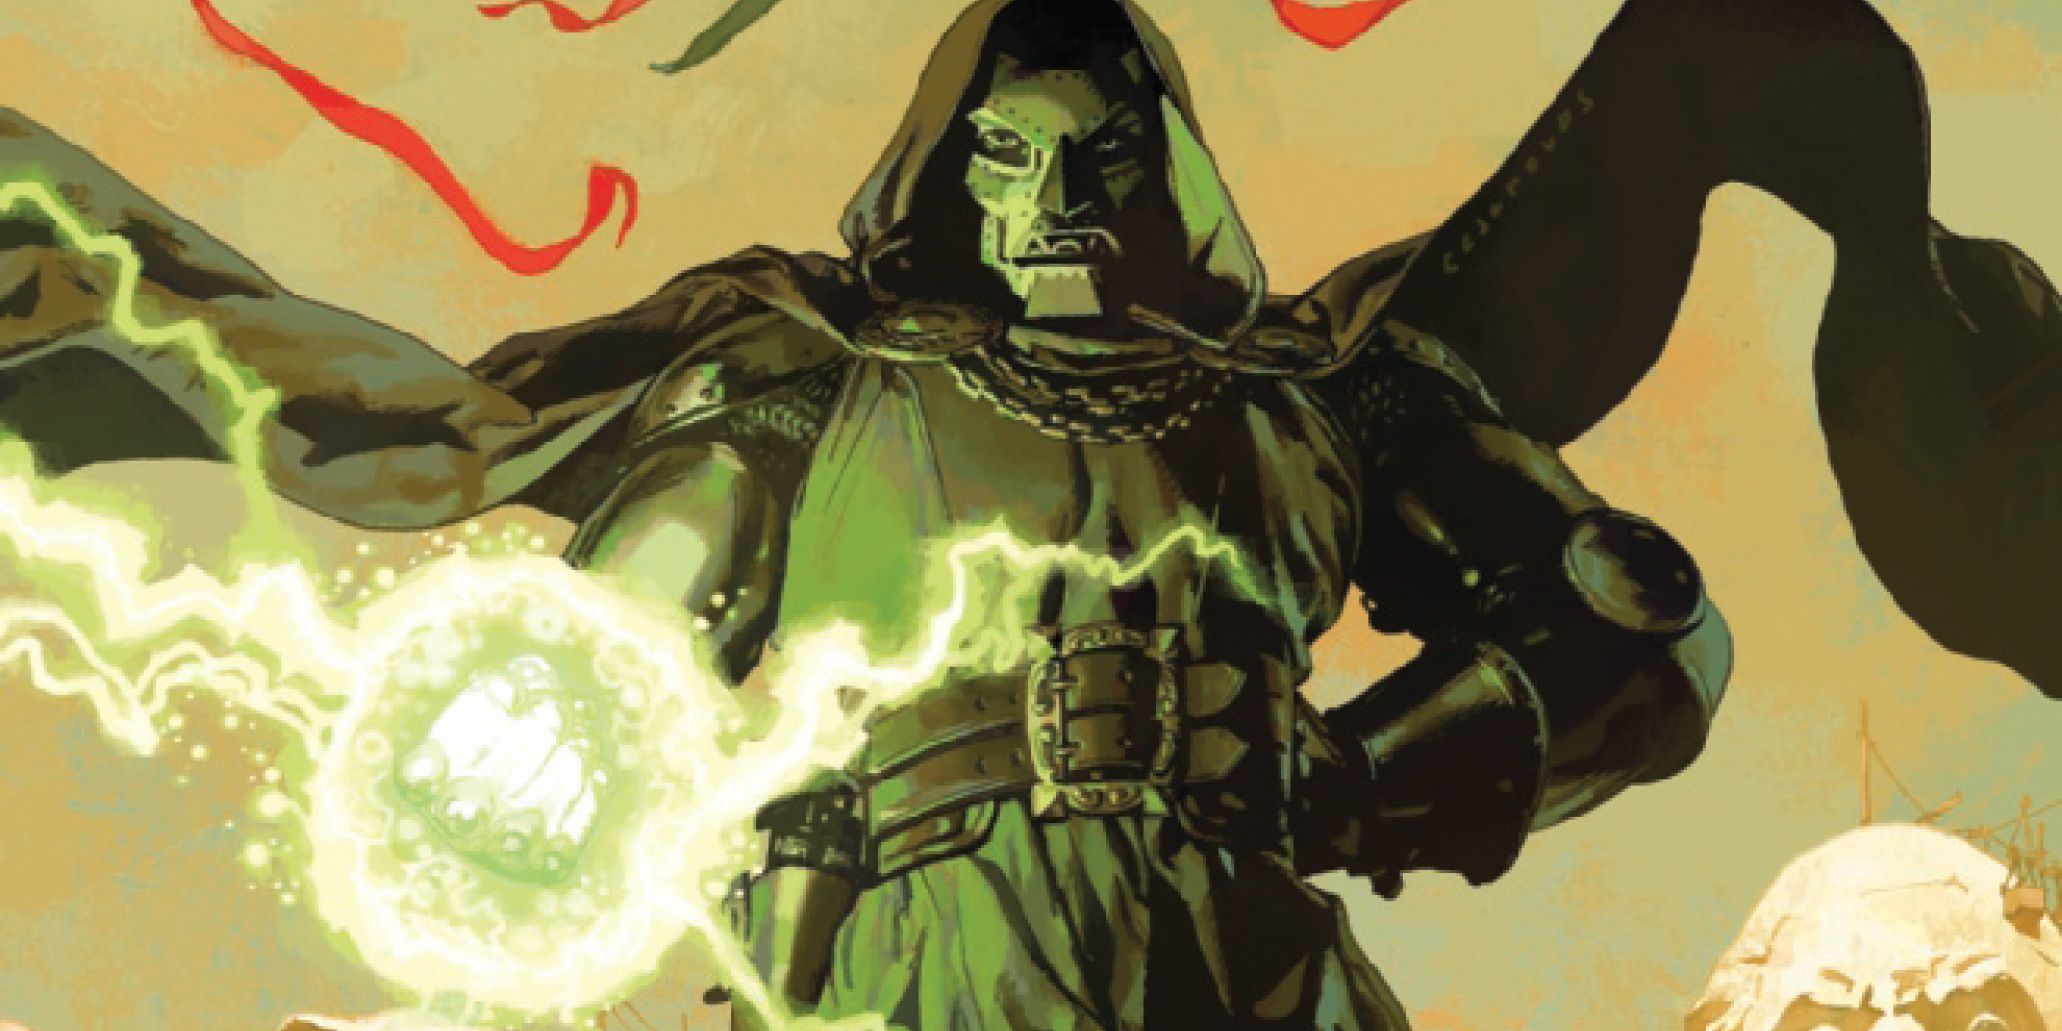 Doctor Doom projects energy from his armored gauntlet in Marvel Comics